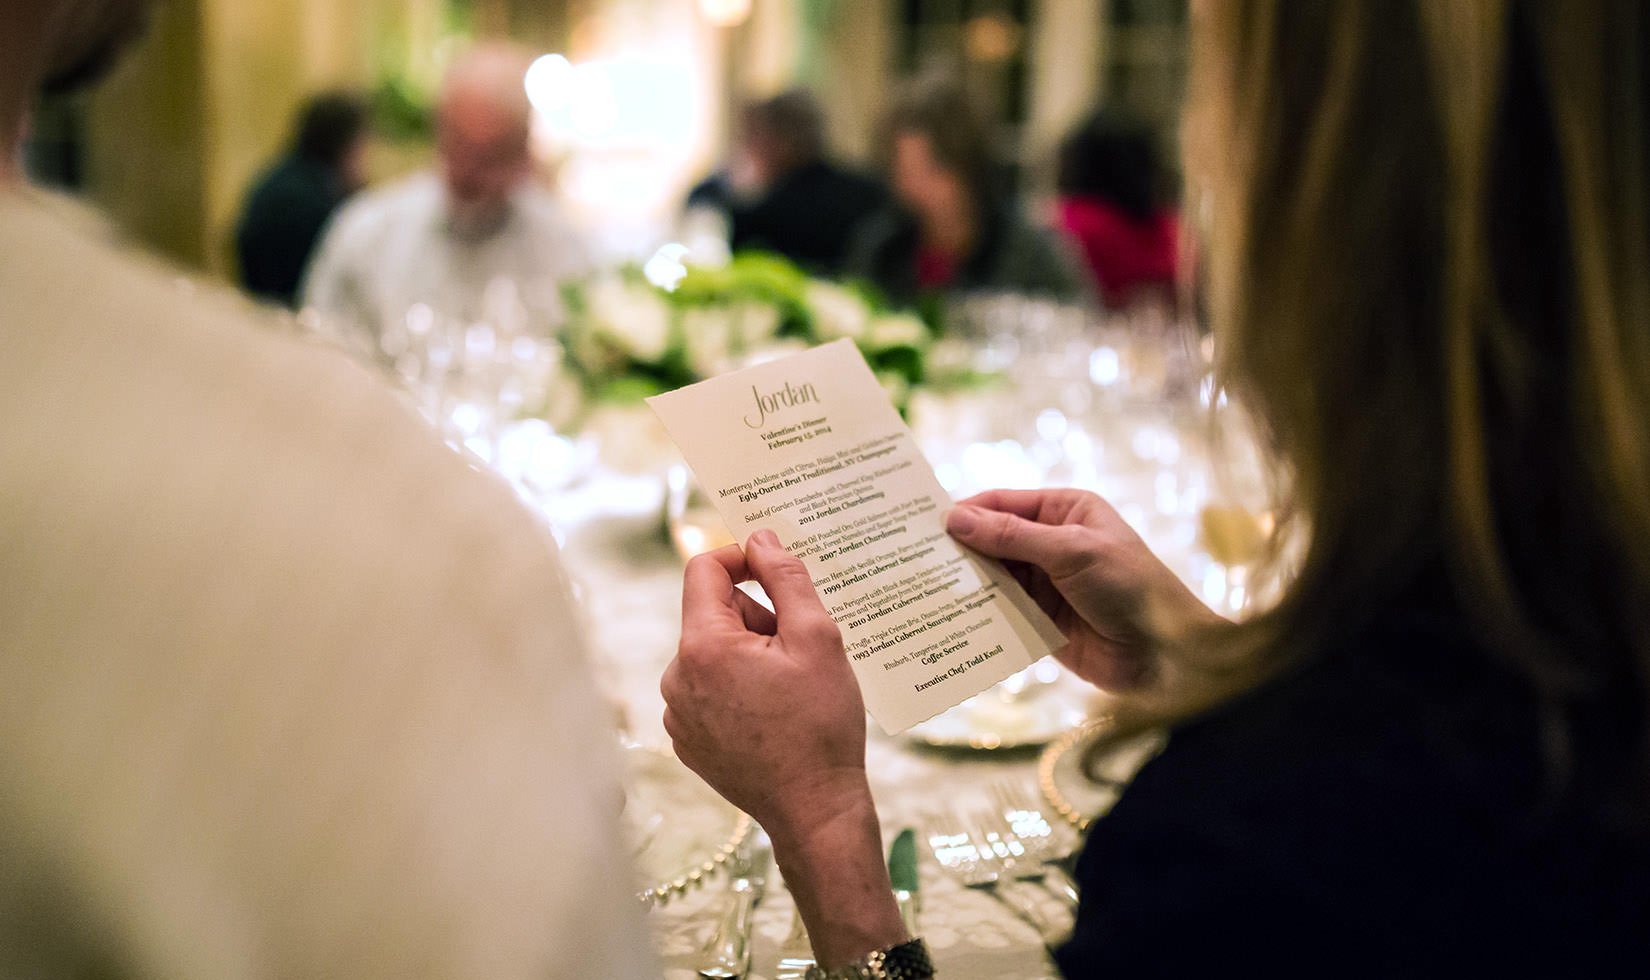 A guest holds the menu to read it.